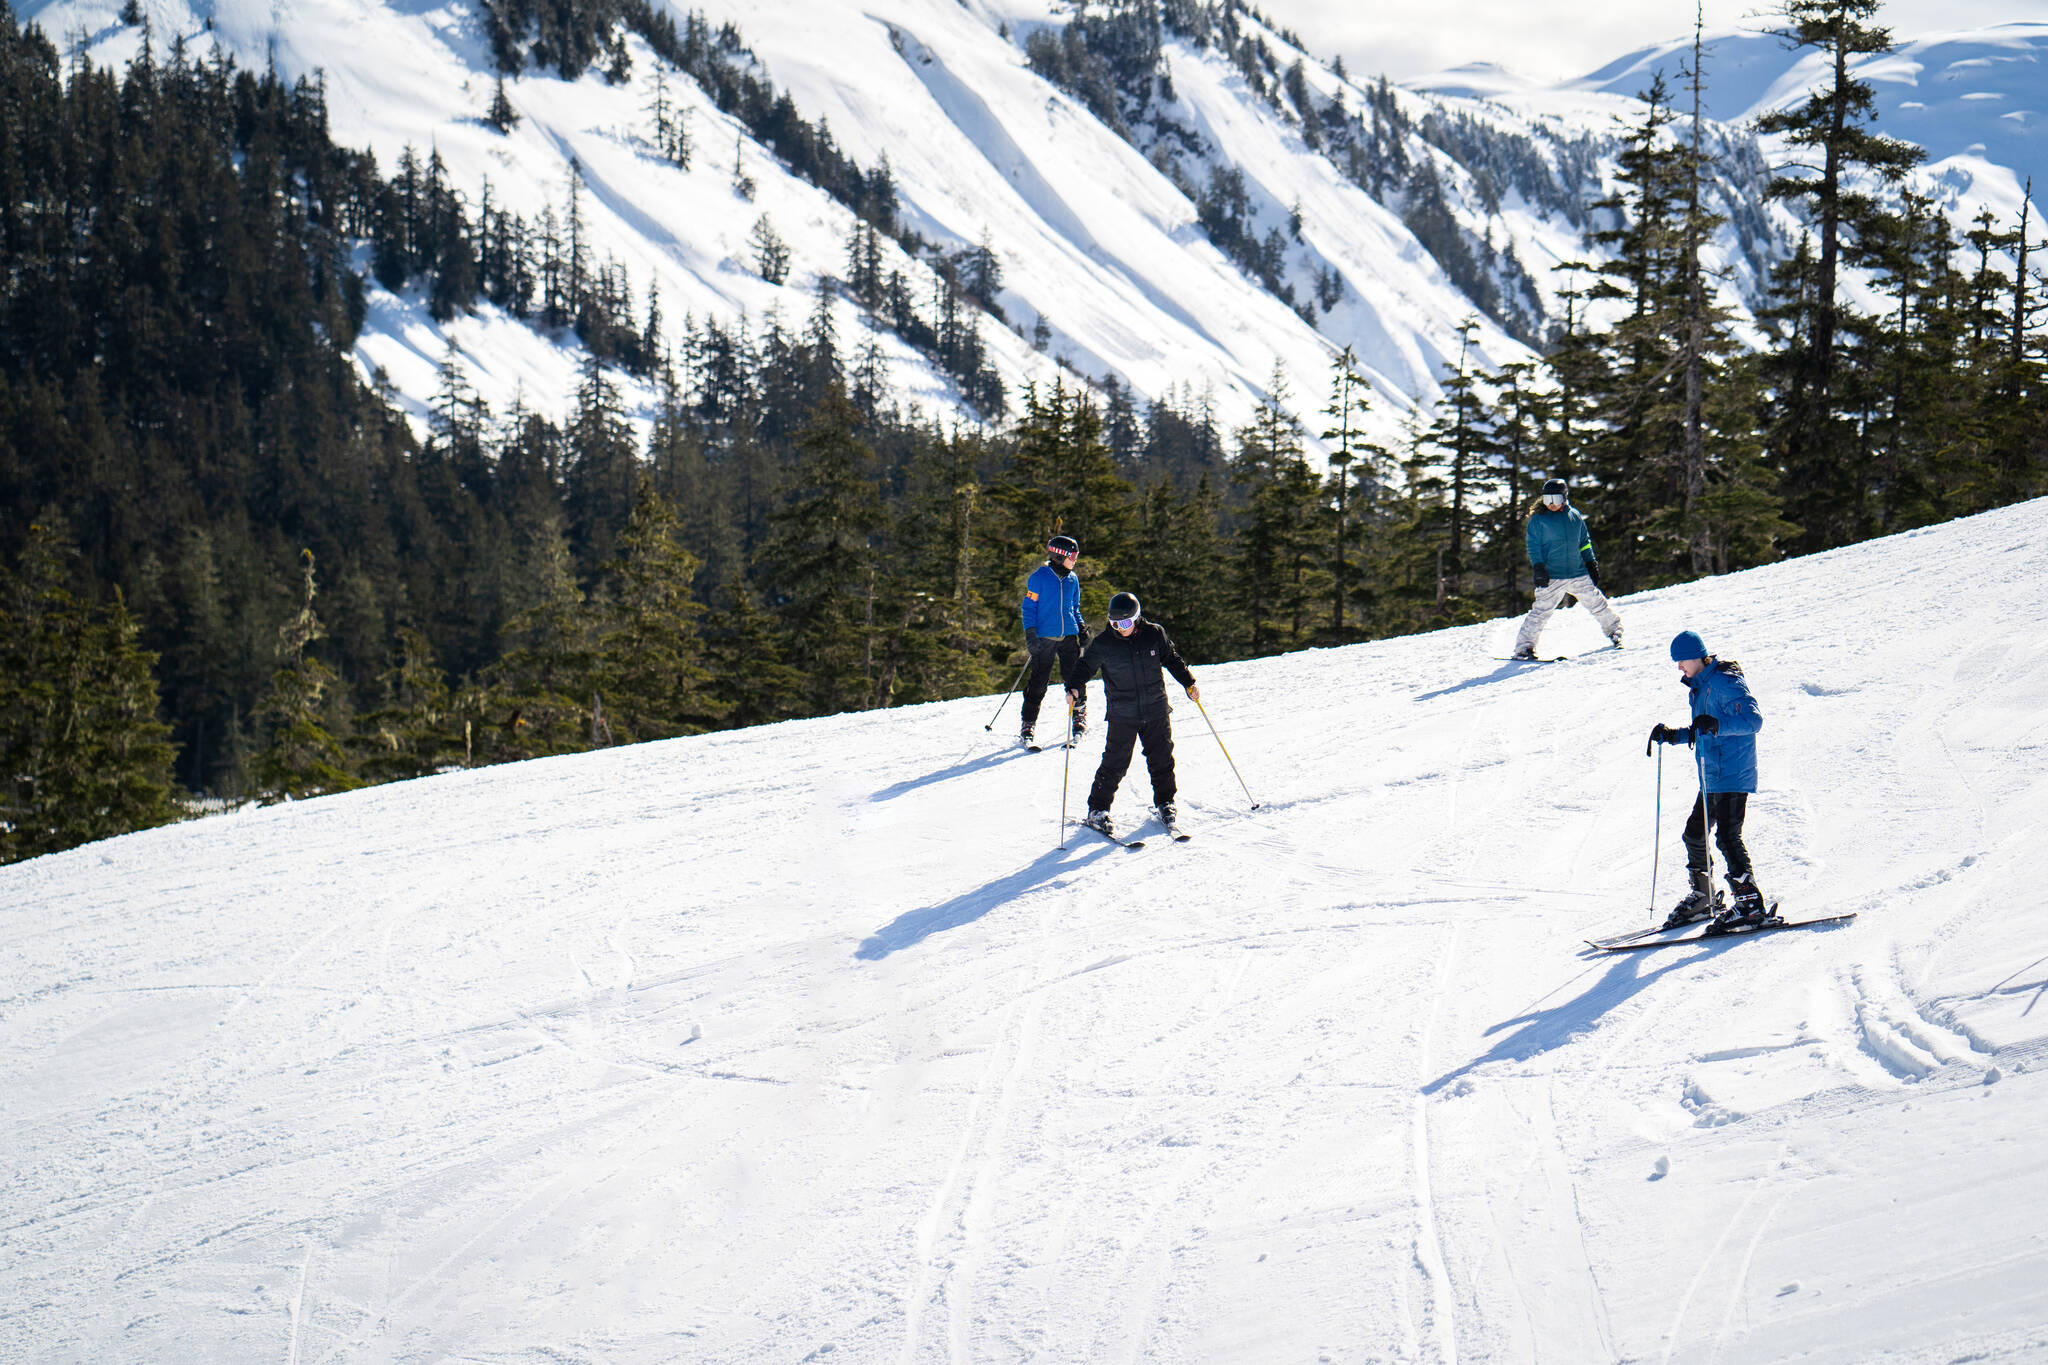 From left to right, Ryland Carlson, Judah Haven Marr, Makia Mills, and Dylan DeAsis, four Douglas Indian Association Snow Camp participants, gather at the top of a run before dropping in.